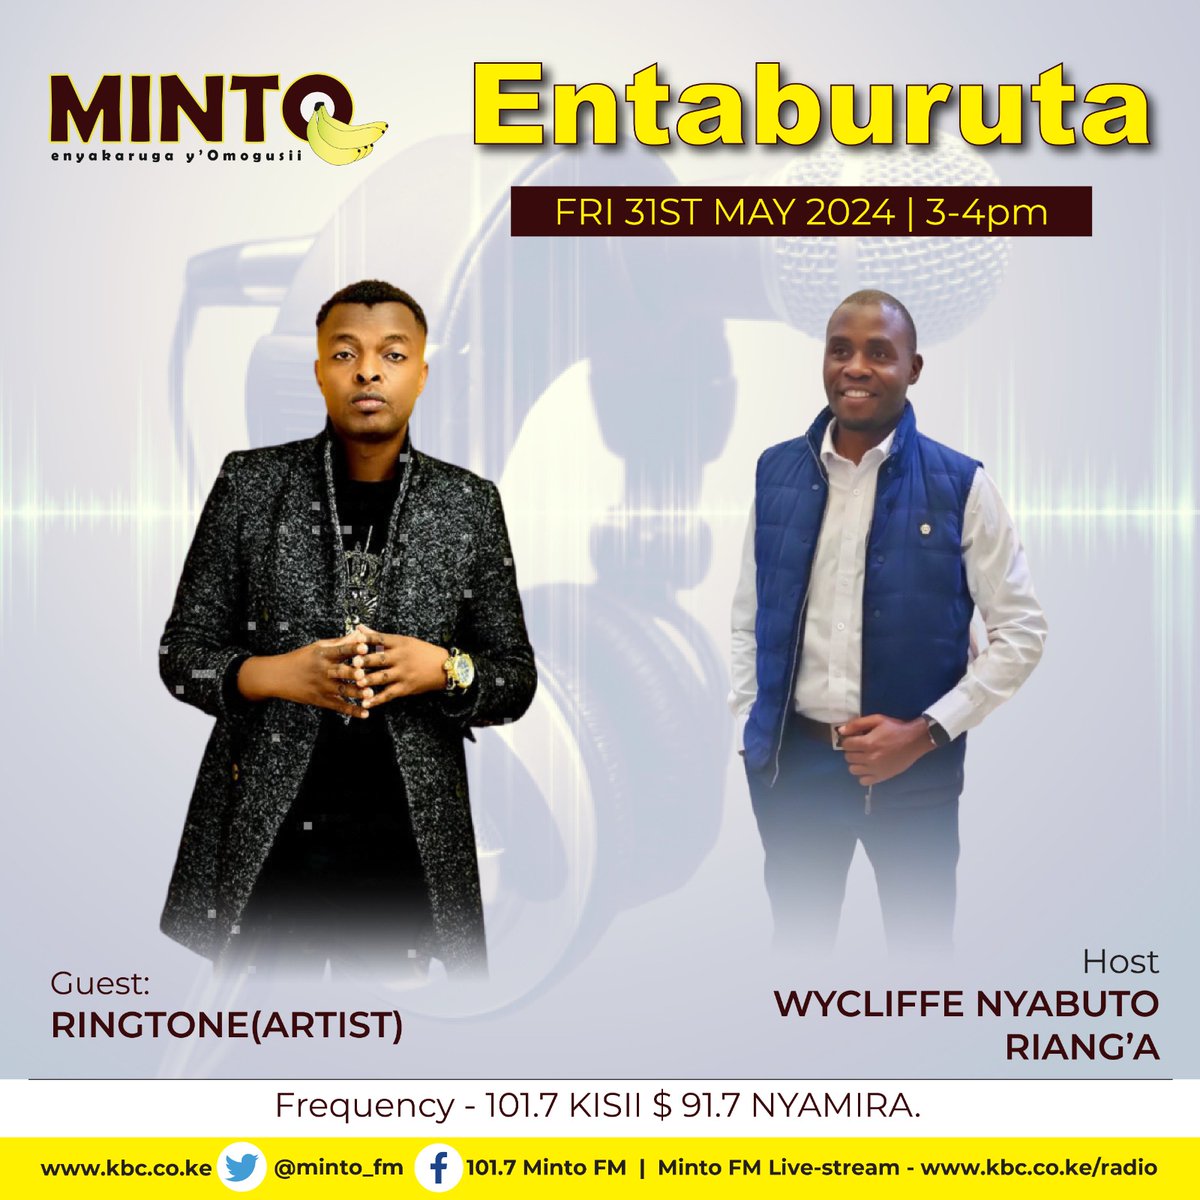 Your favourite gospel artist, Ringtone is in the house to launch his new song, #Lawyer! Are you listening? ^MK
#MintoFM
#RiangaOnIt
#MintoFmRadio